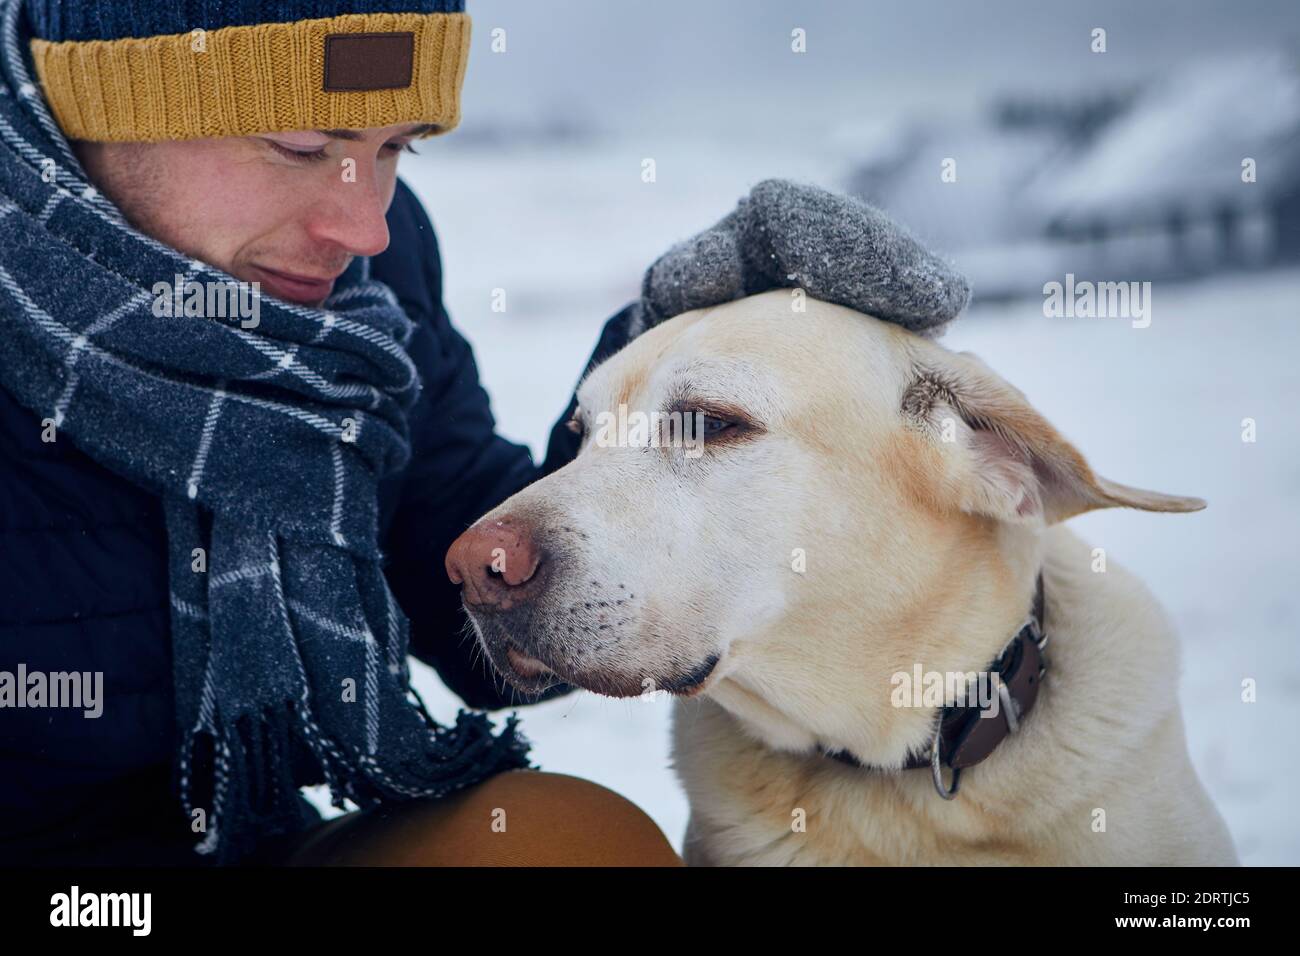 Man in warm clothing stroking dog on snowy field. Pet owner and his labrador retriever against winter landscape. Stock Photo